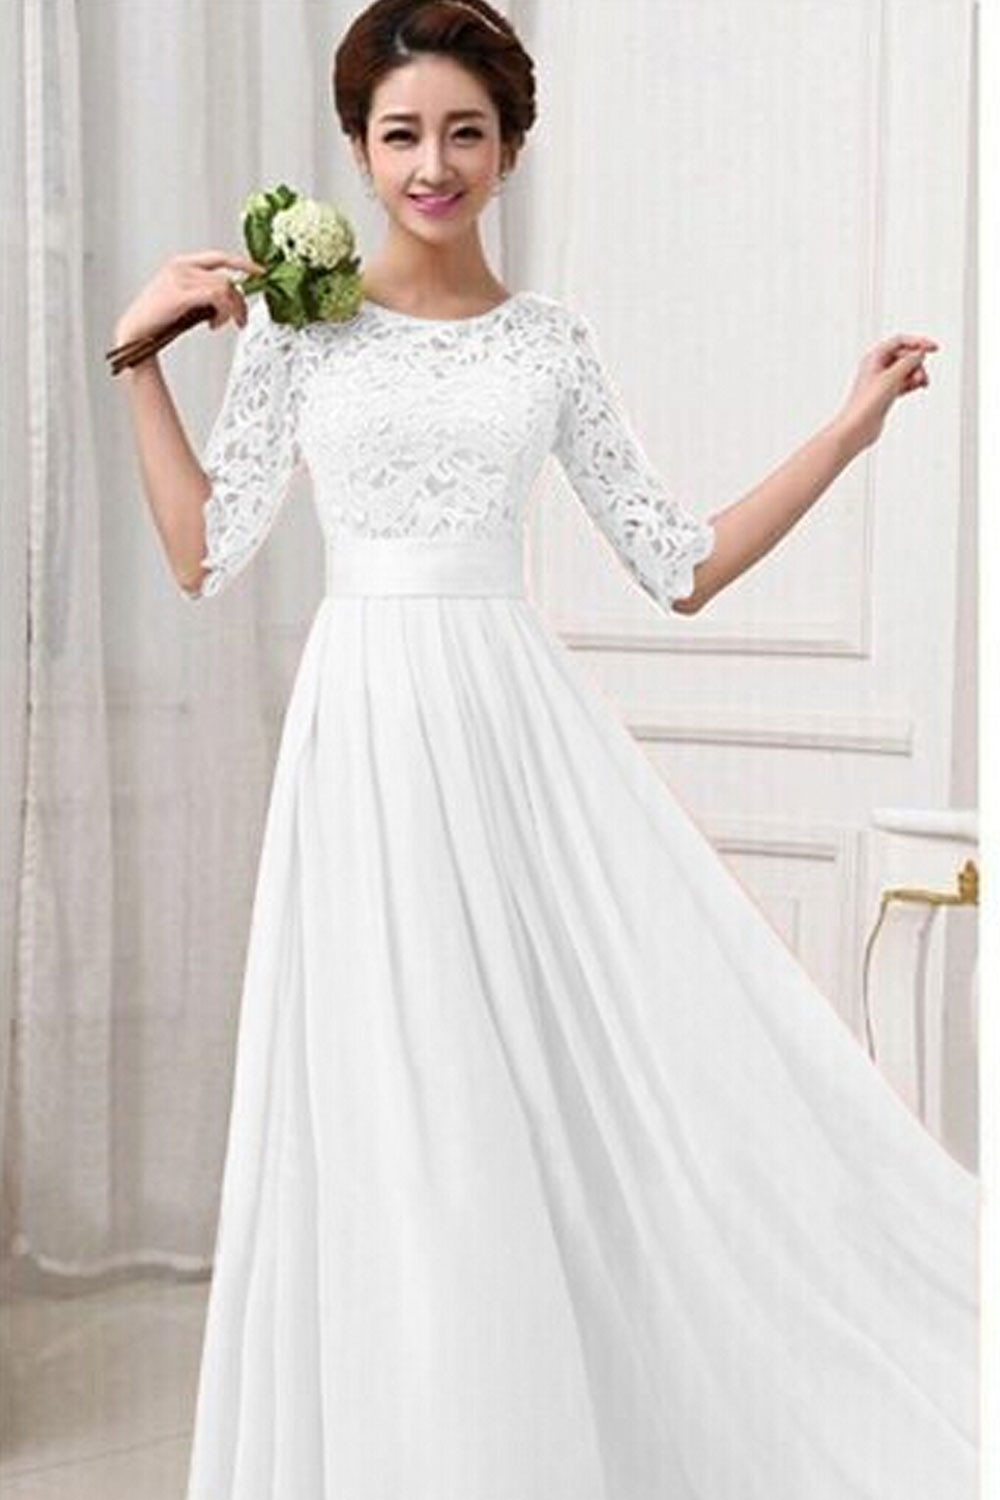 Winter Wedding Party Dresses
 KETTYMORE WOMEN WINTER PARTY DRESSES LACE DESIGNED LONG